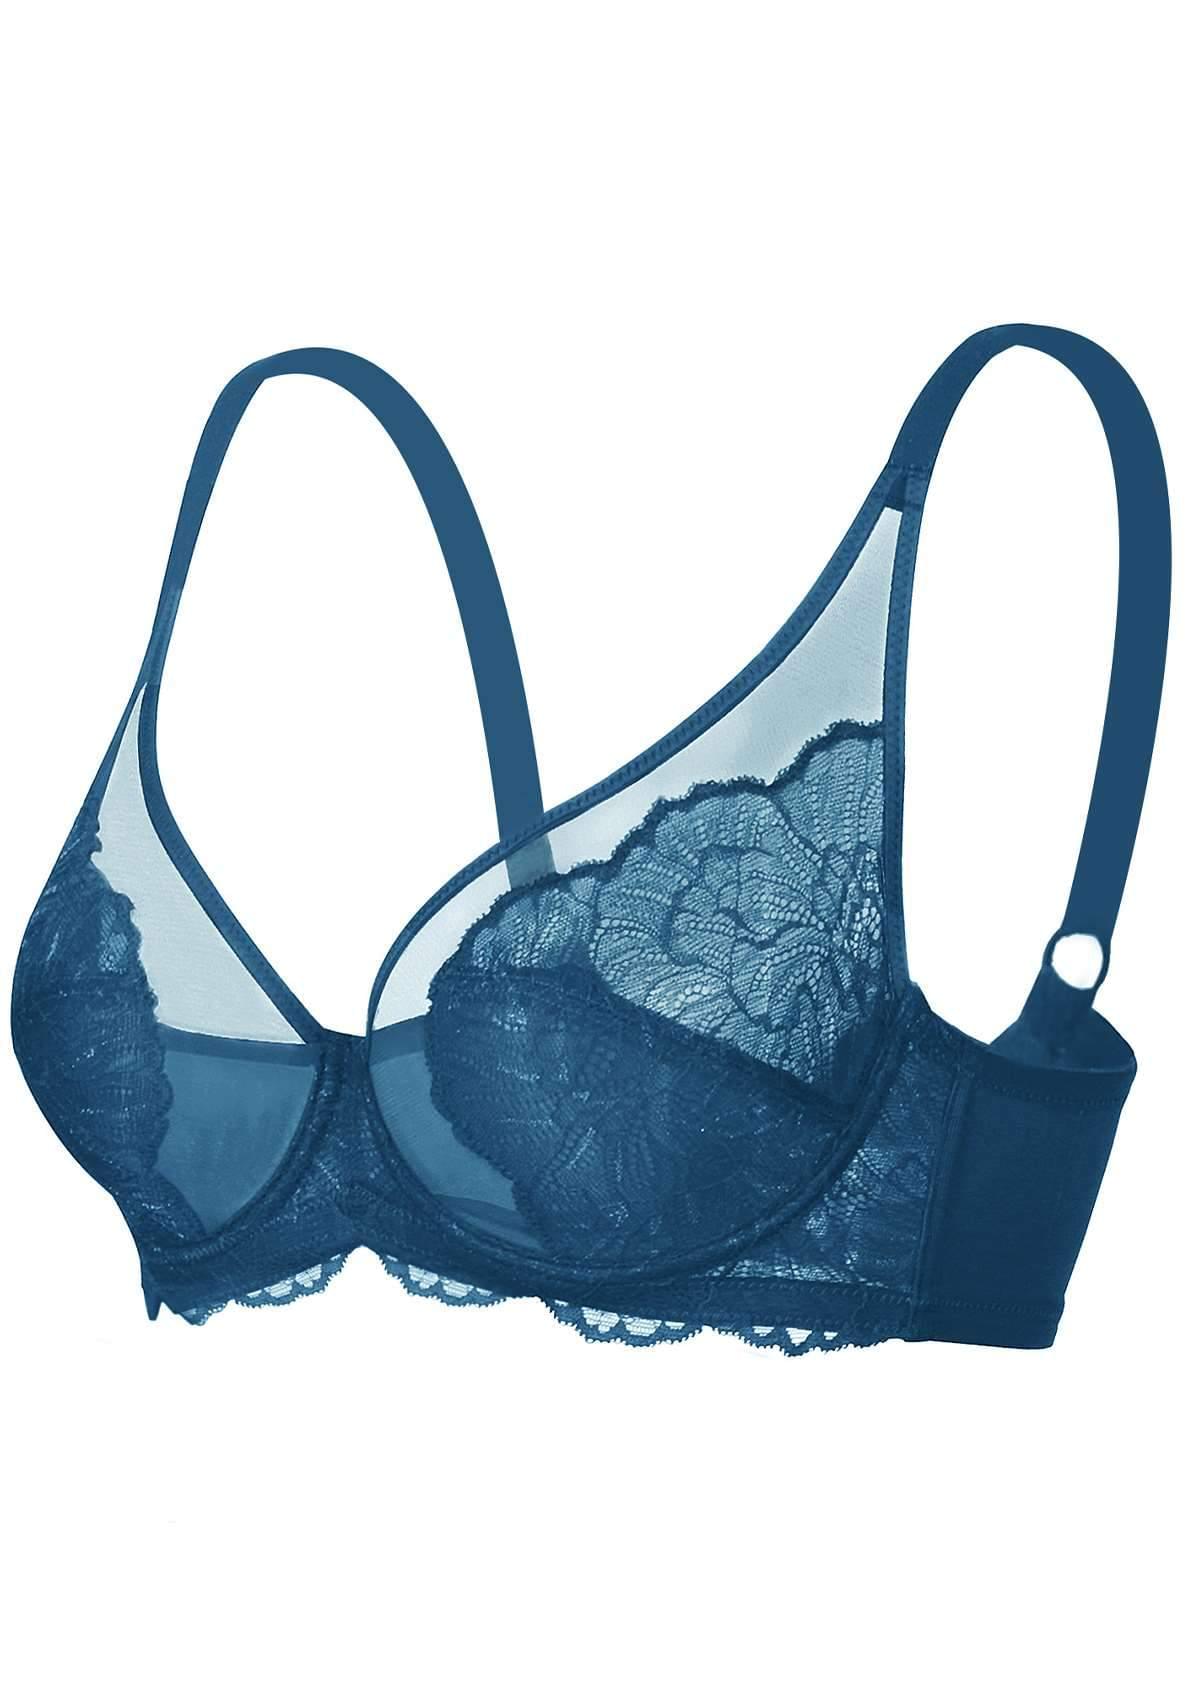 HSIA Blossom Lace Bra And Underwear Sets: Comfortable Plus Size Bra - Biscay Blue / 40 / D